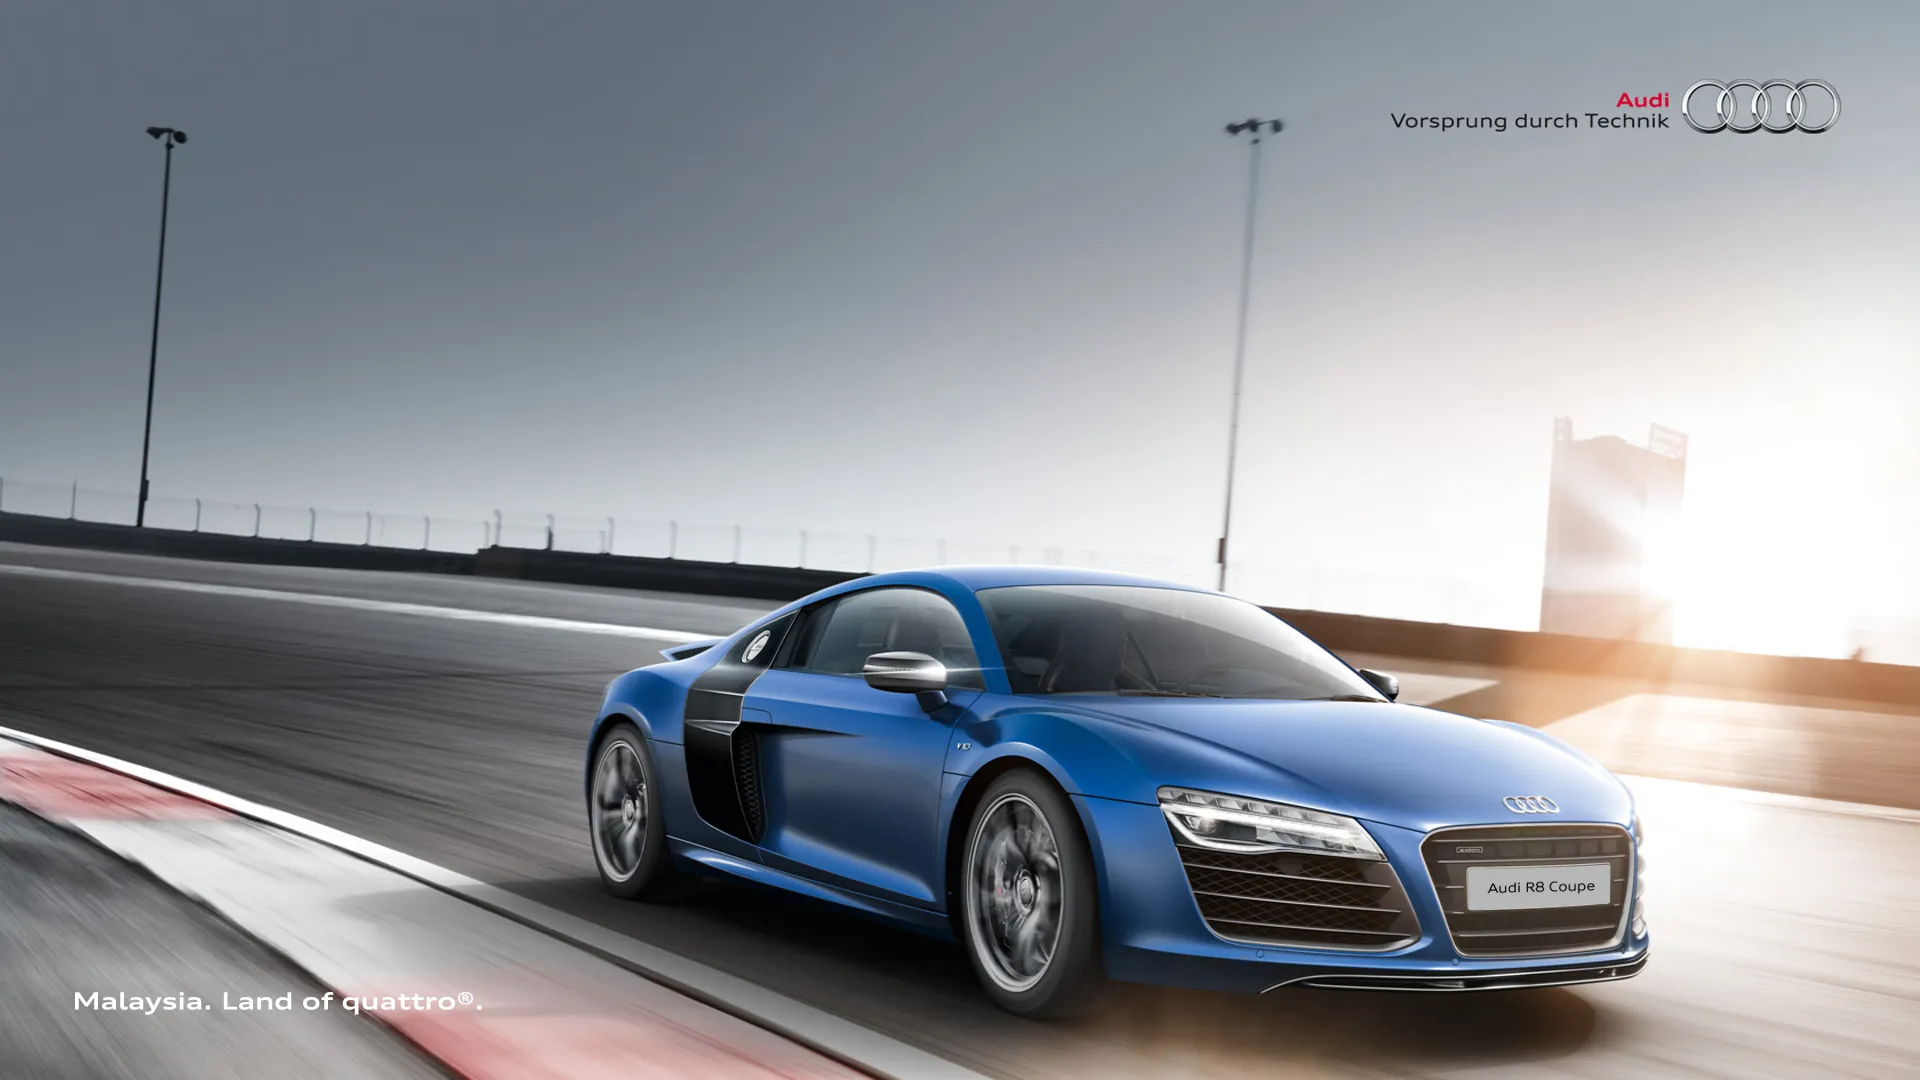 R8Coupe_1920x1080